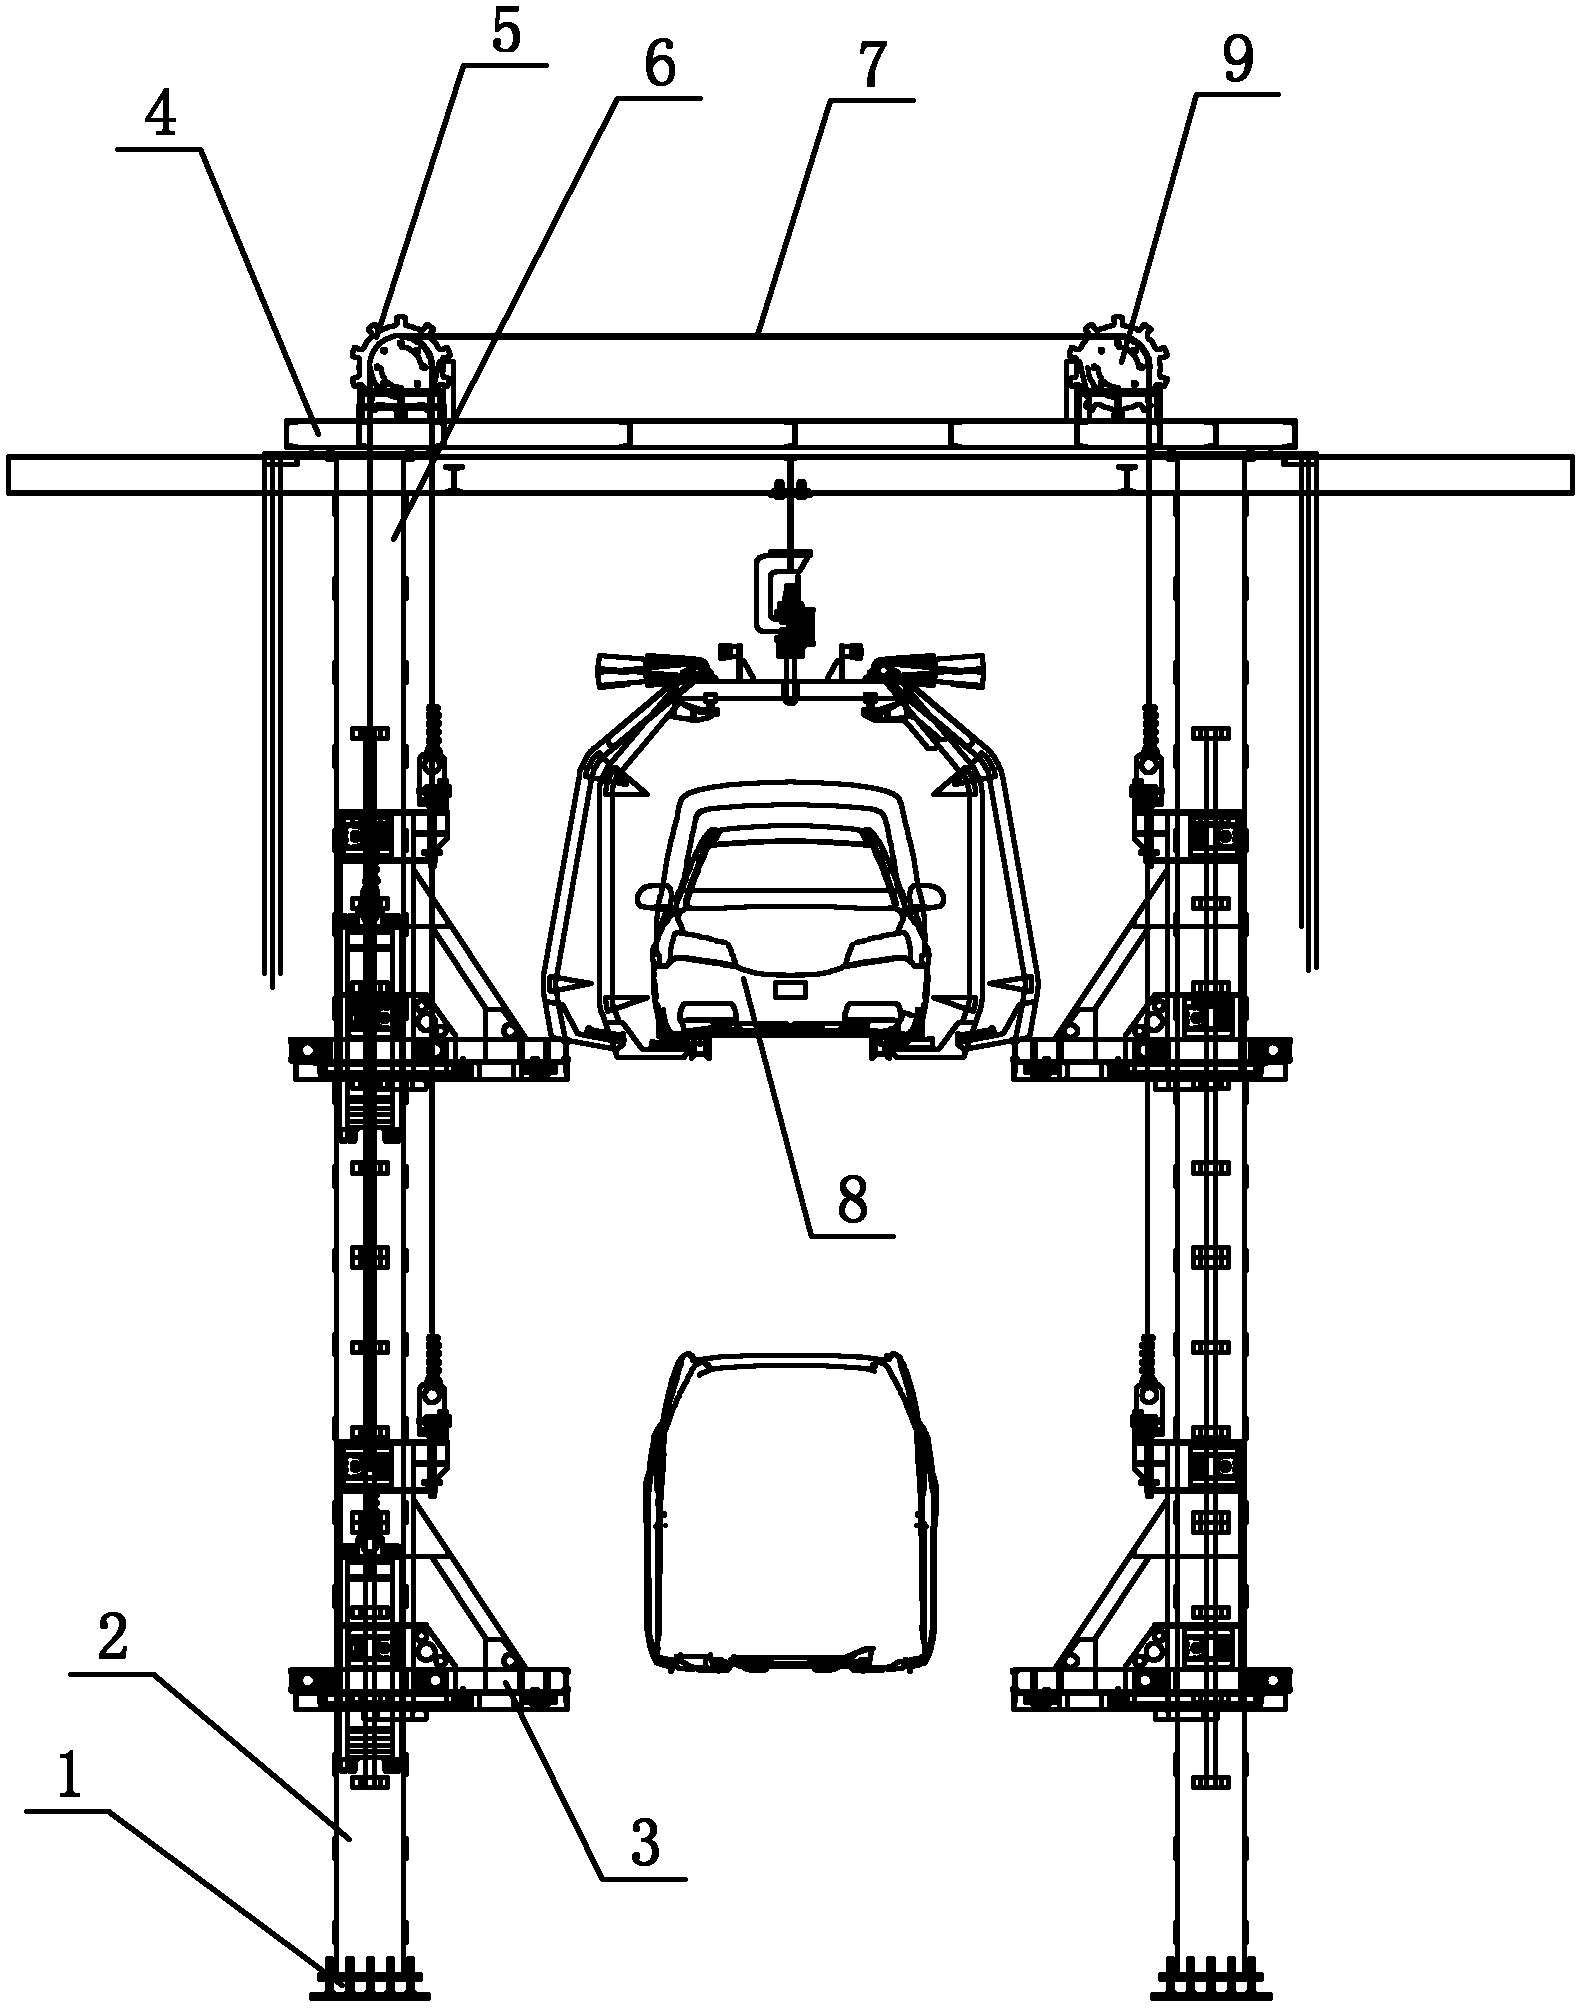 Two-vertical-column belt lifter capable of separating workpiece from rail to realize transshipment